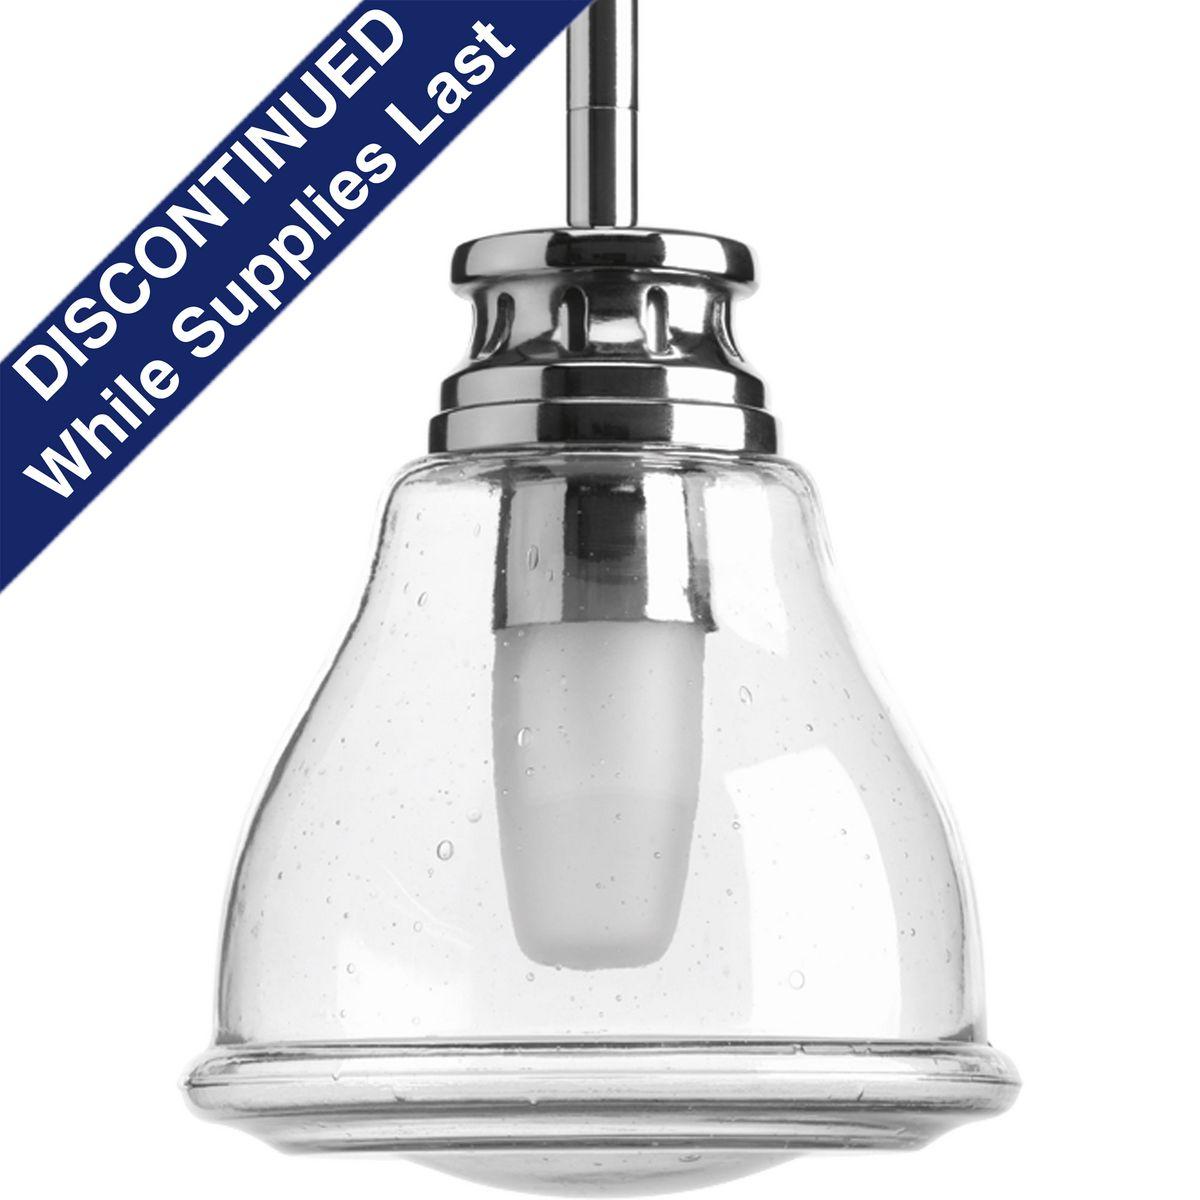 Hubbell P5097-15 Polished Chrome one-light mini-pendant features a nostalgic, yet decidedly modern, design. Outer translucent seeded globe mimic the silhouette of a traditional light bulb but contain a halogen source for bright illumination. Versatile structure can be ins